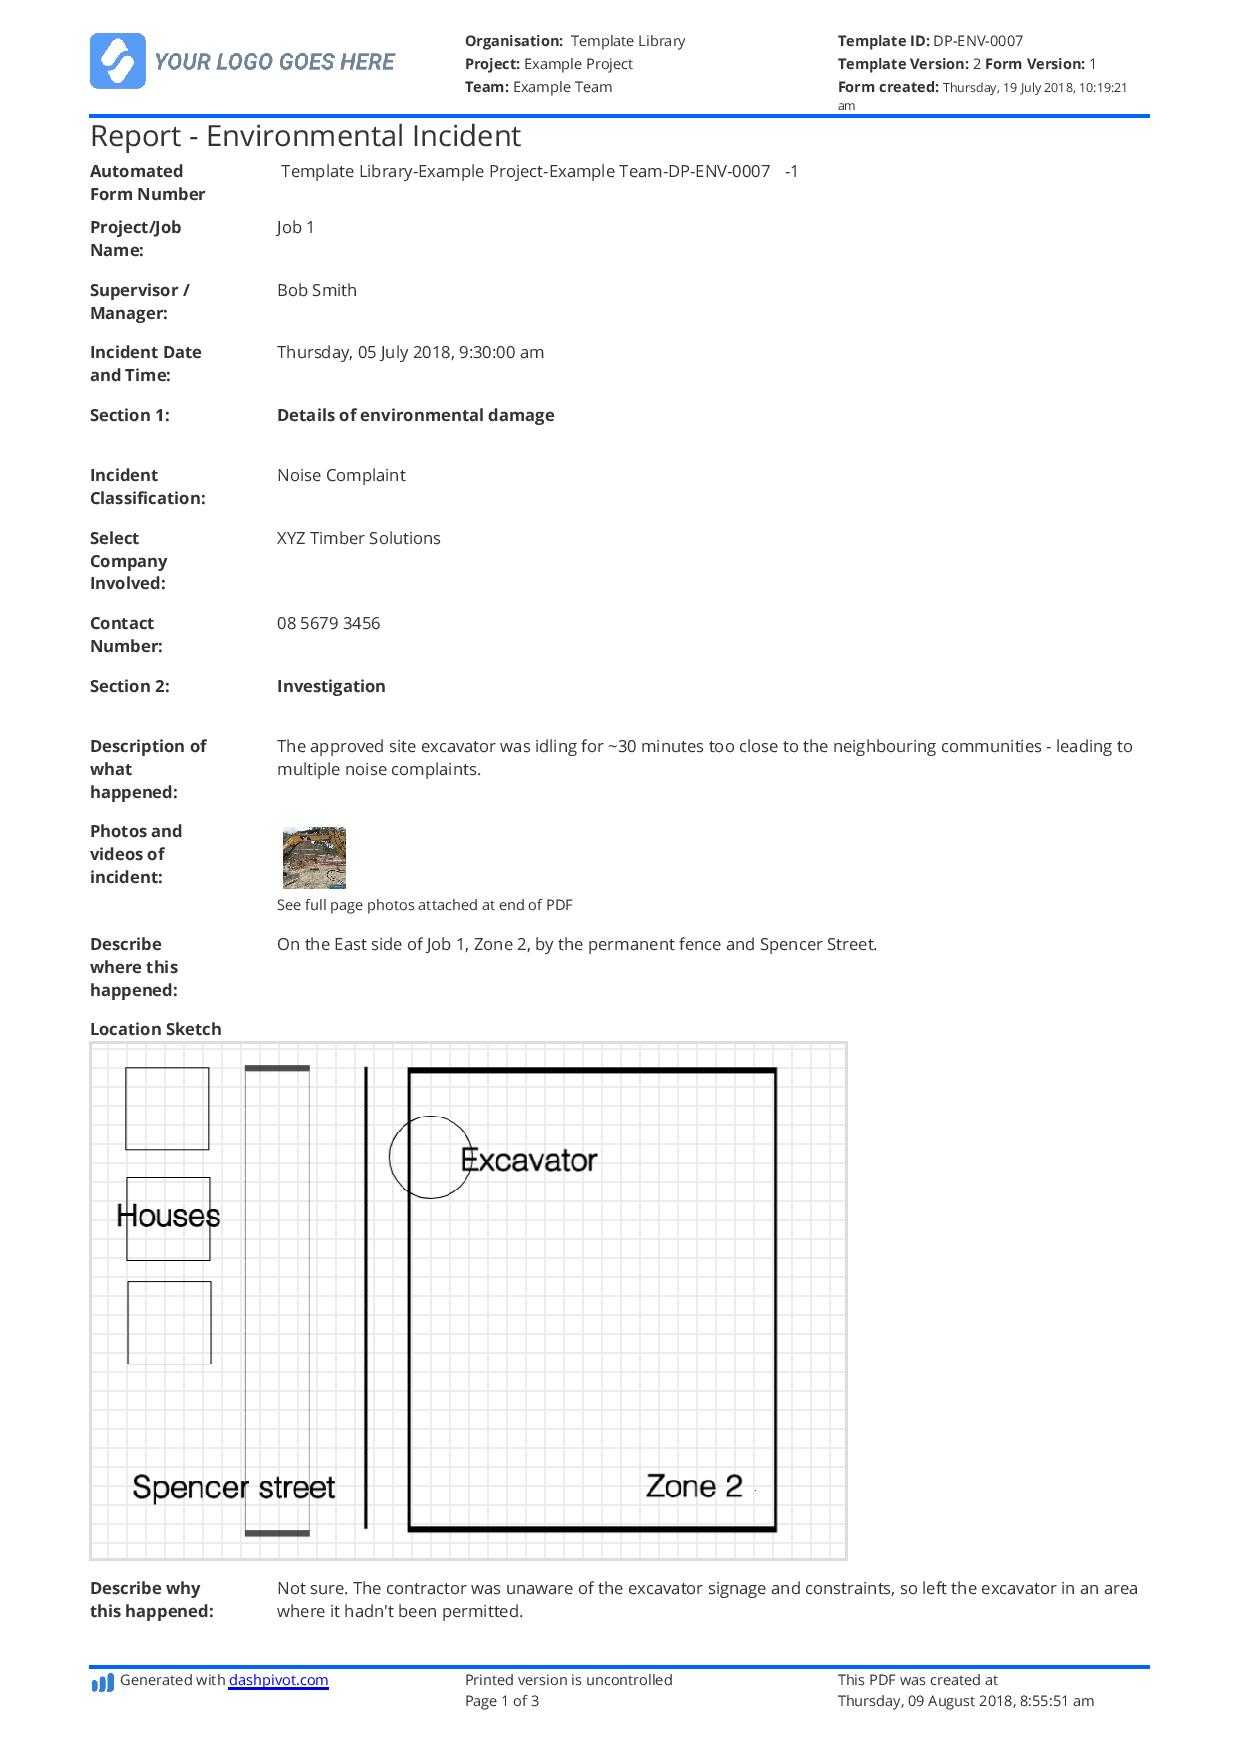 Environmental Incident Report Form Template: Use This Free In Incident Report Register Template